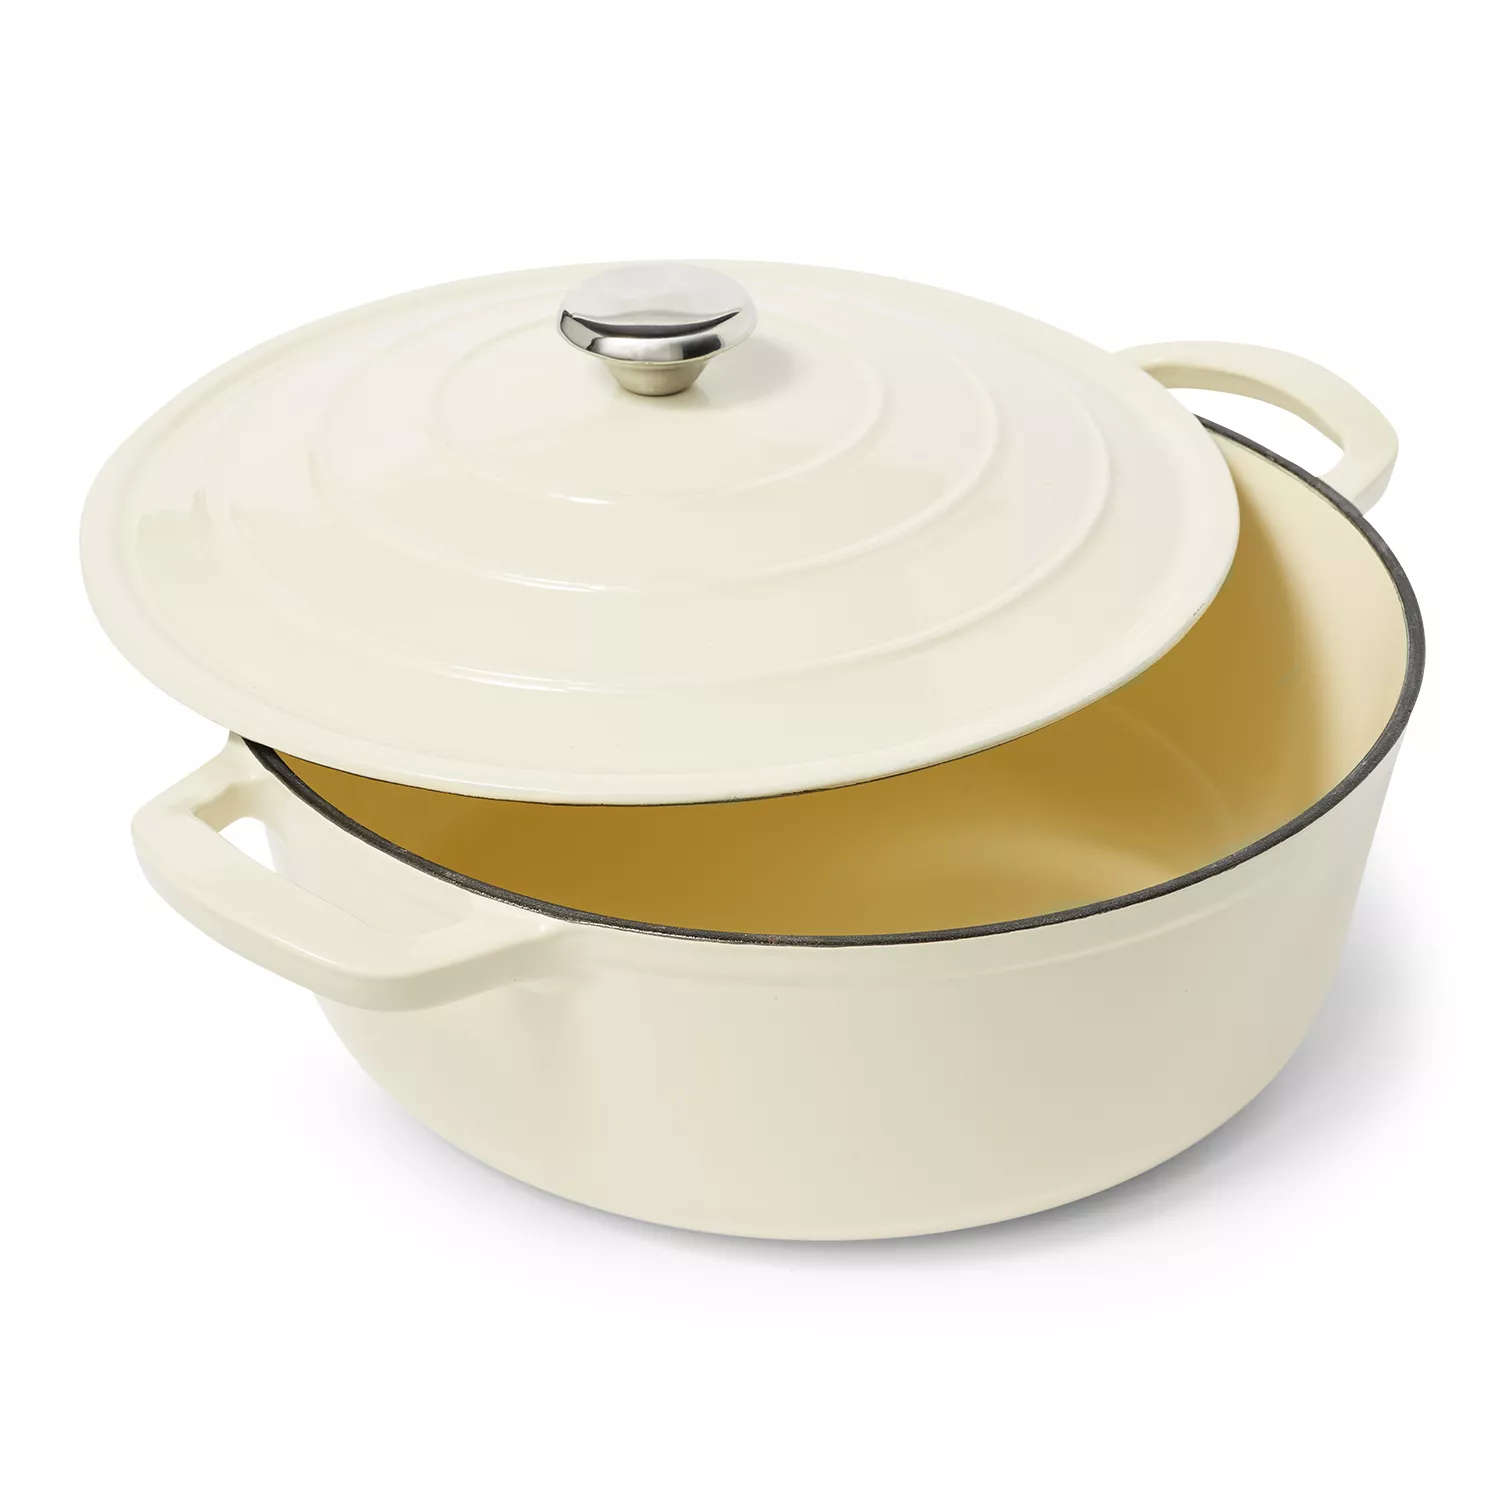 Sur La Table Enameled Cast Iron Round Wide Covered Dutch Oven, 7